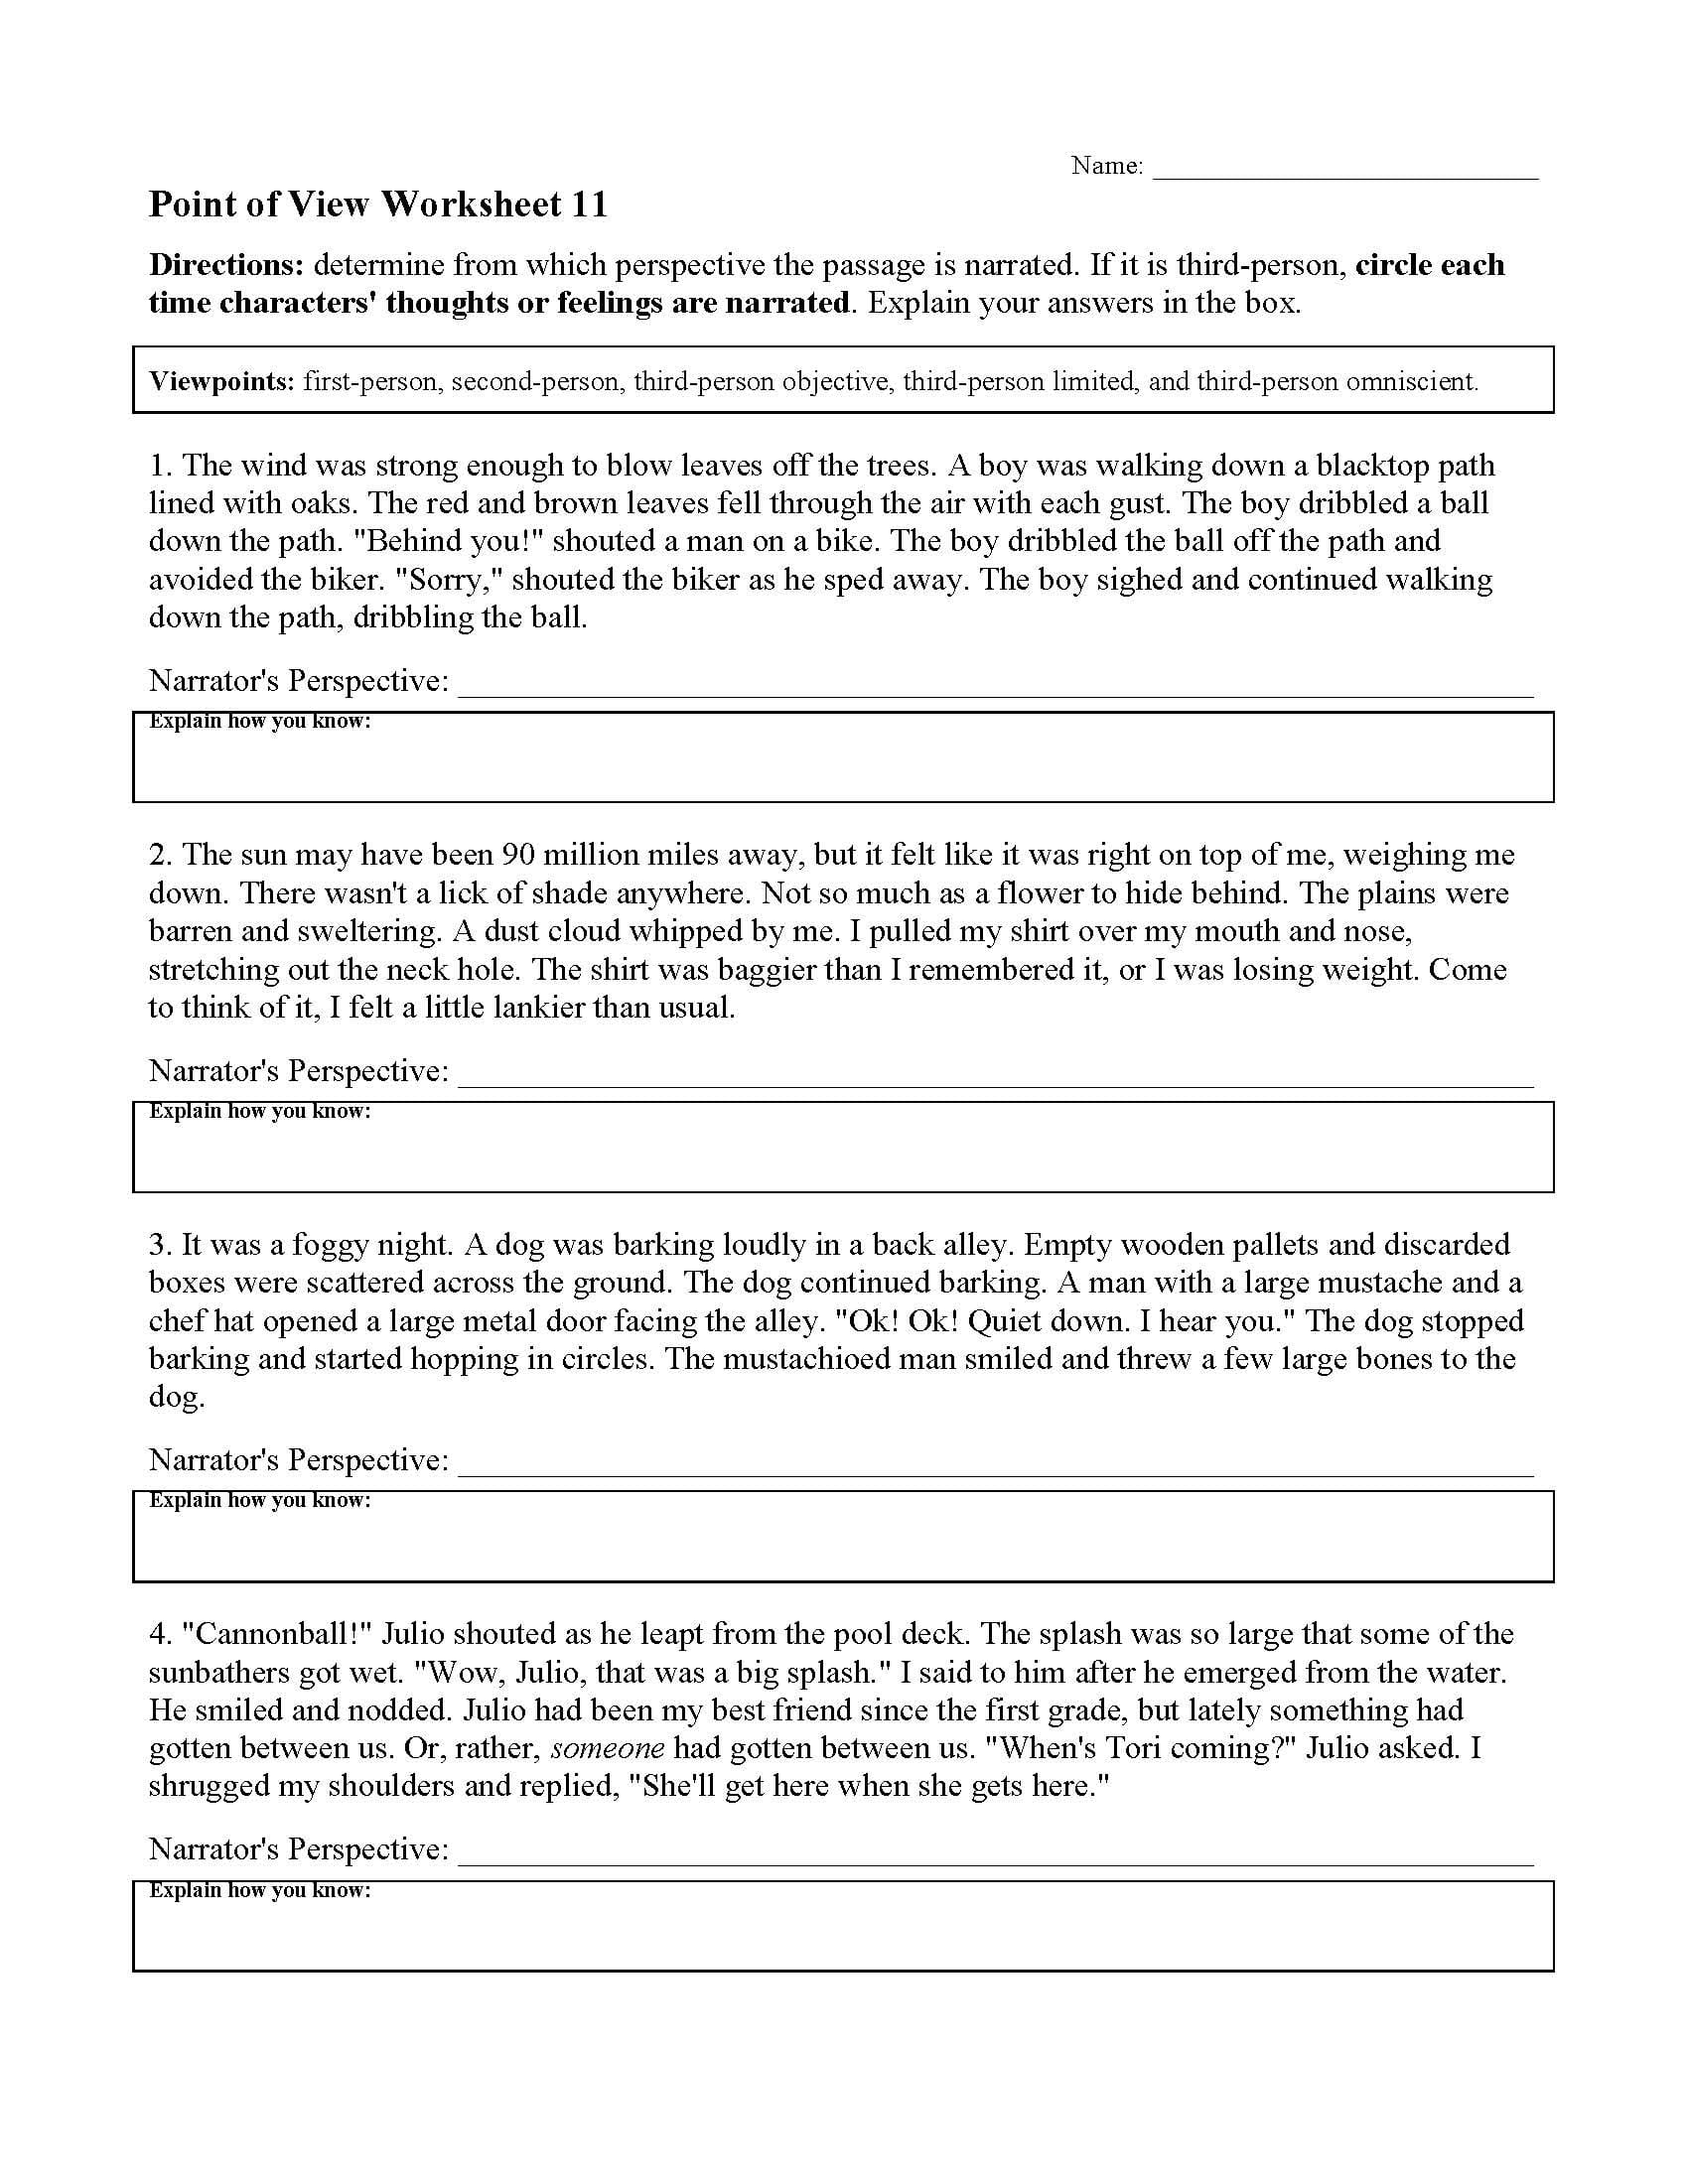 Point Of View Worksheet English 11